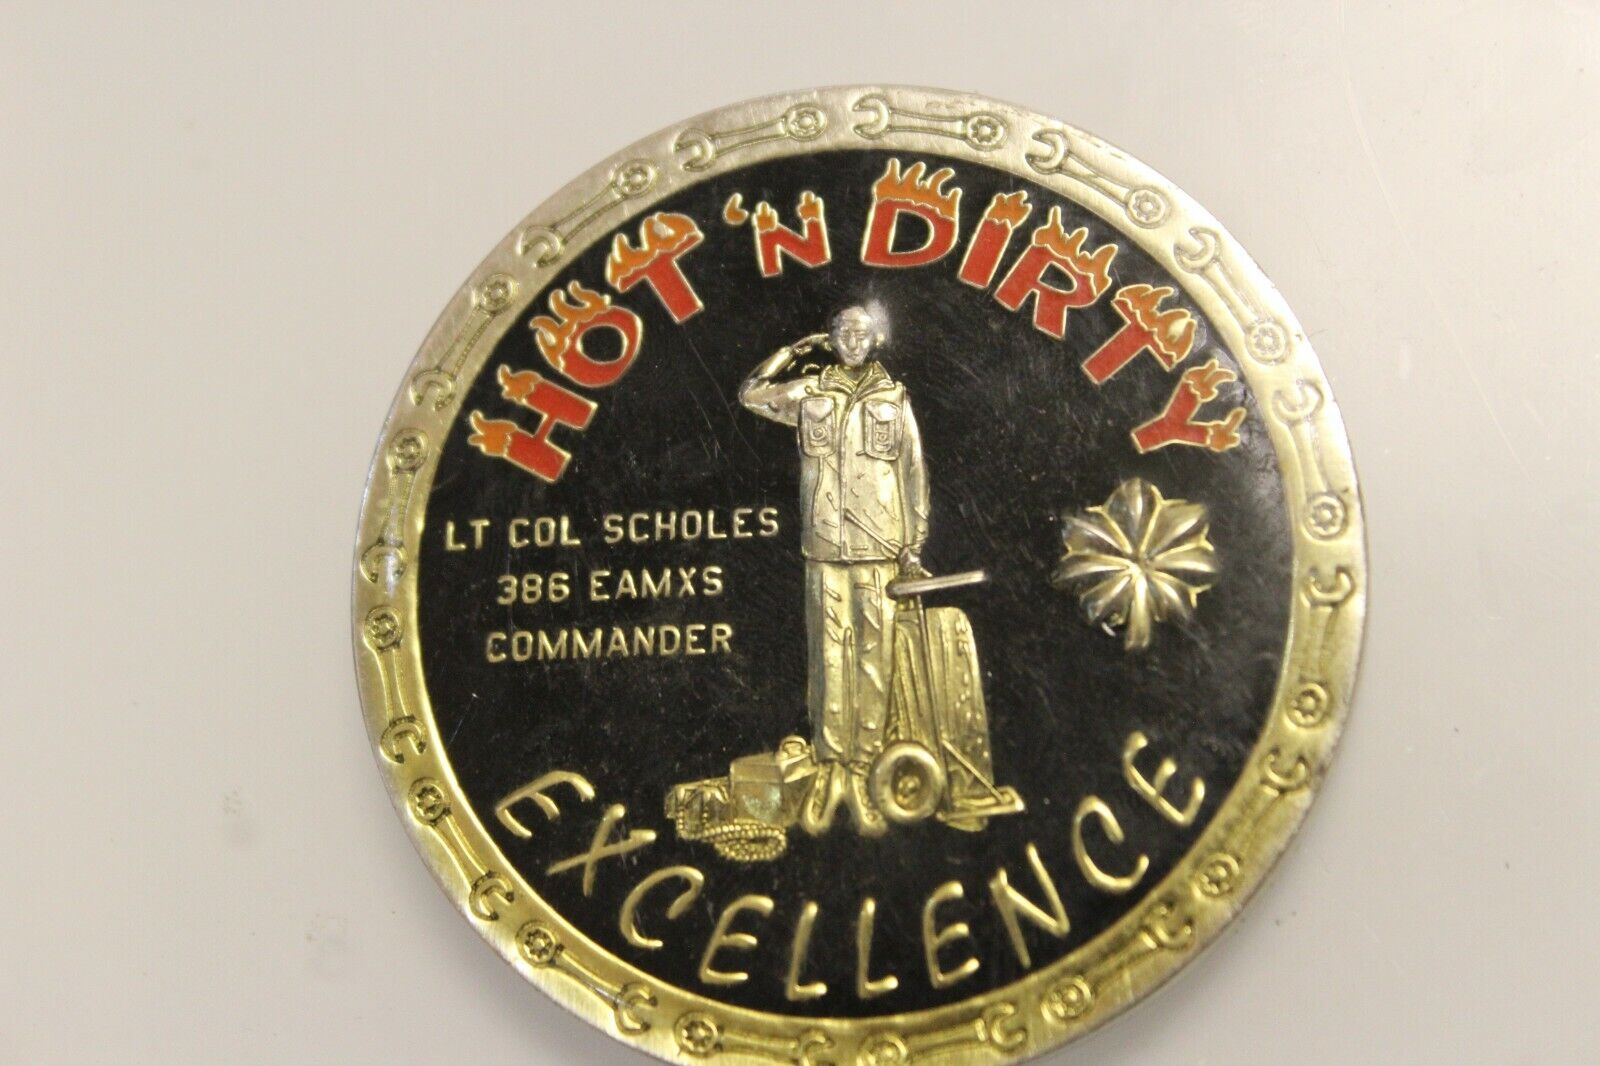 Hot\'n Dirty Lt.Col Scholes 386 Eamxs Commander Challenge Coin